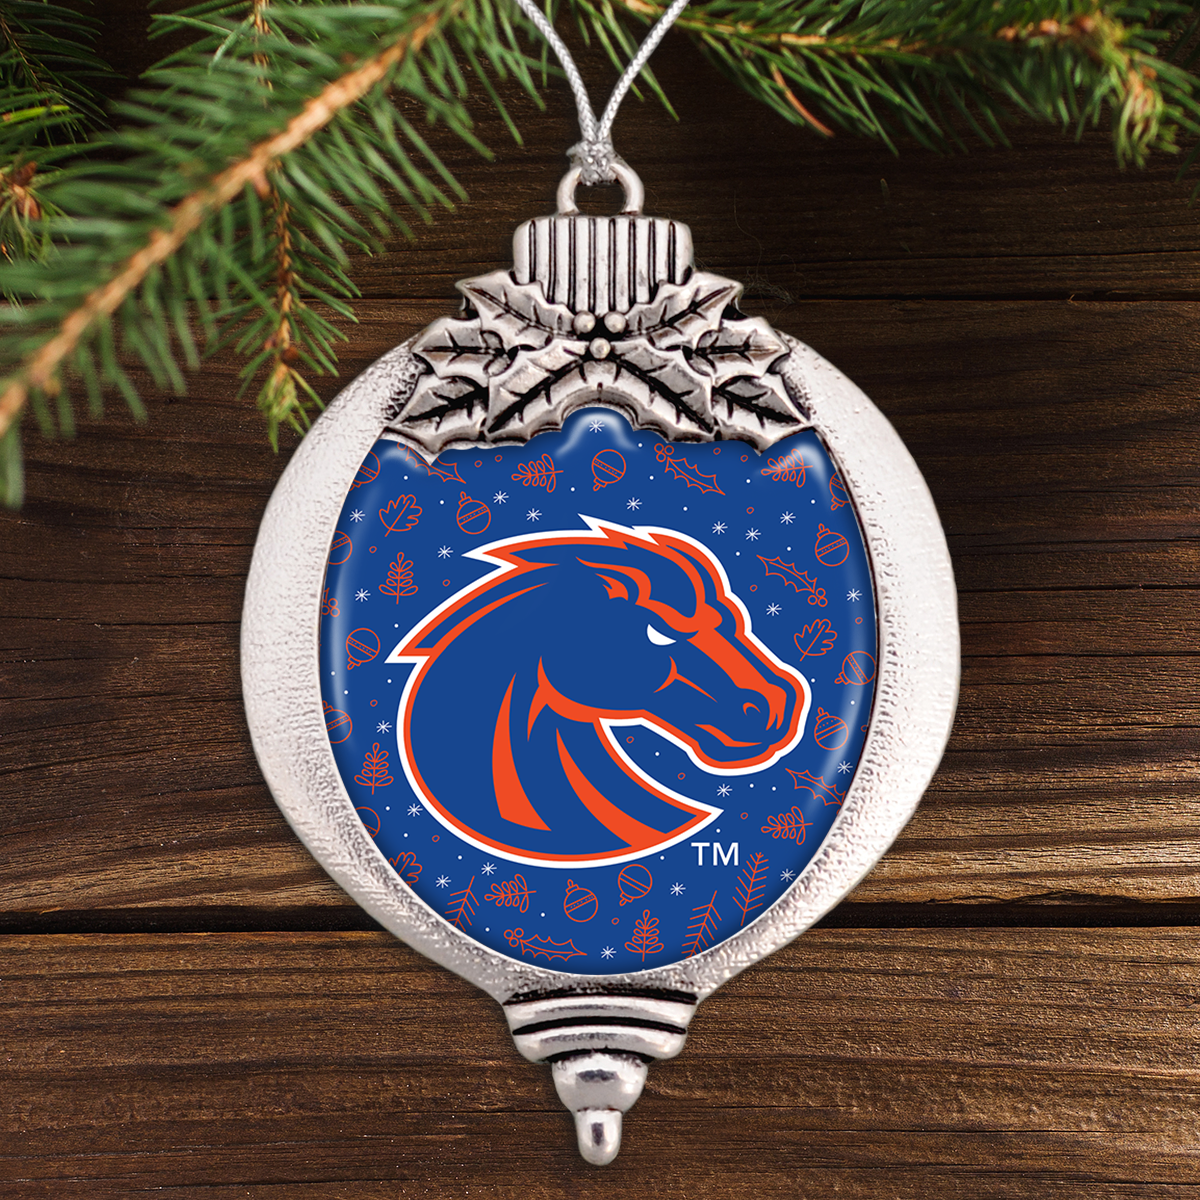 Boise State Broncos Holiday Bulb Ornament